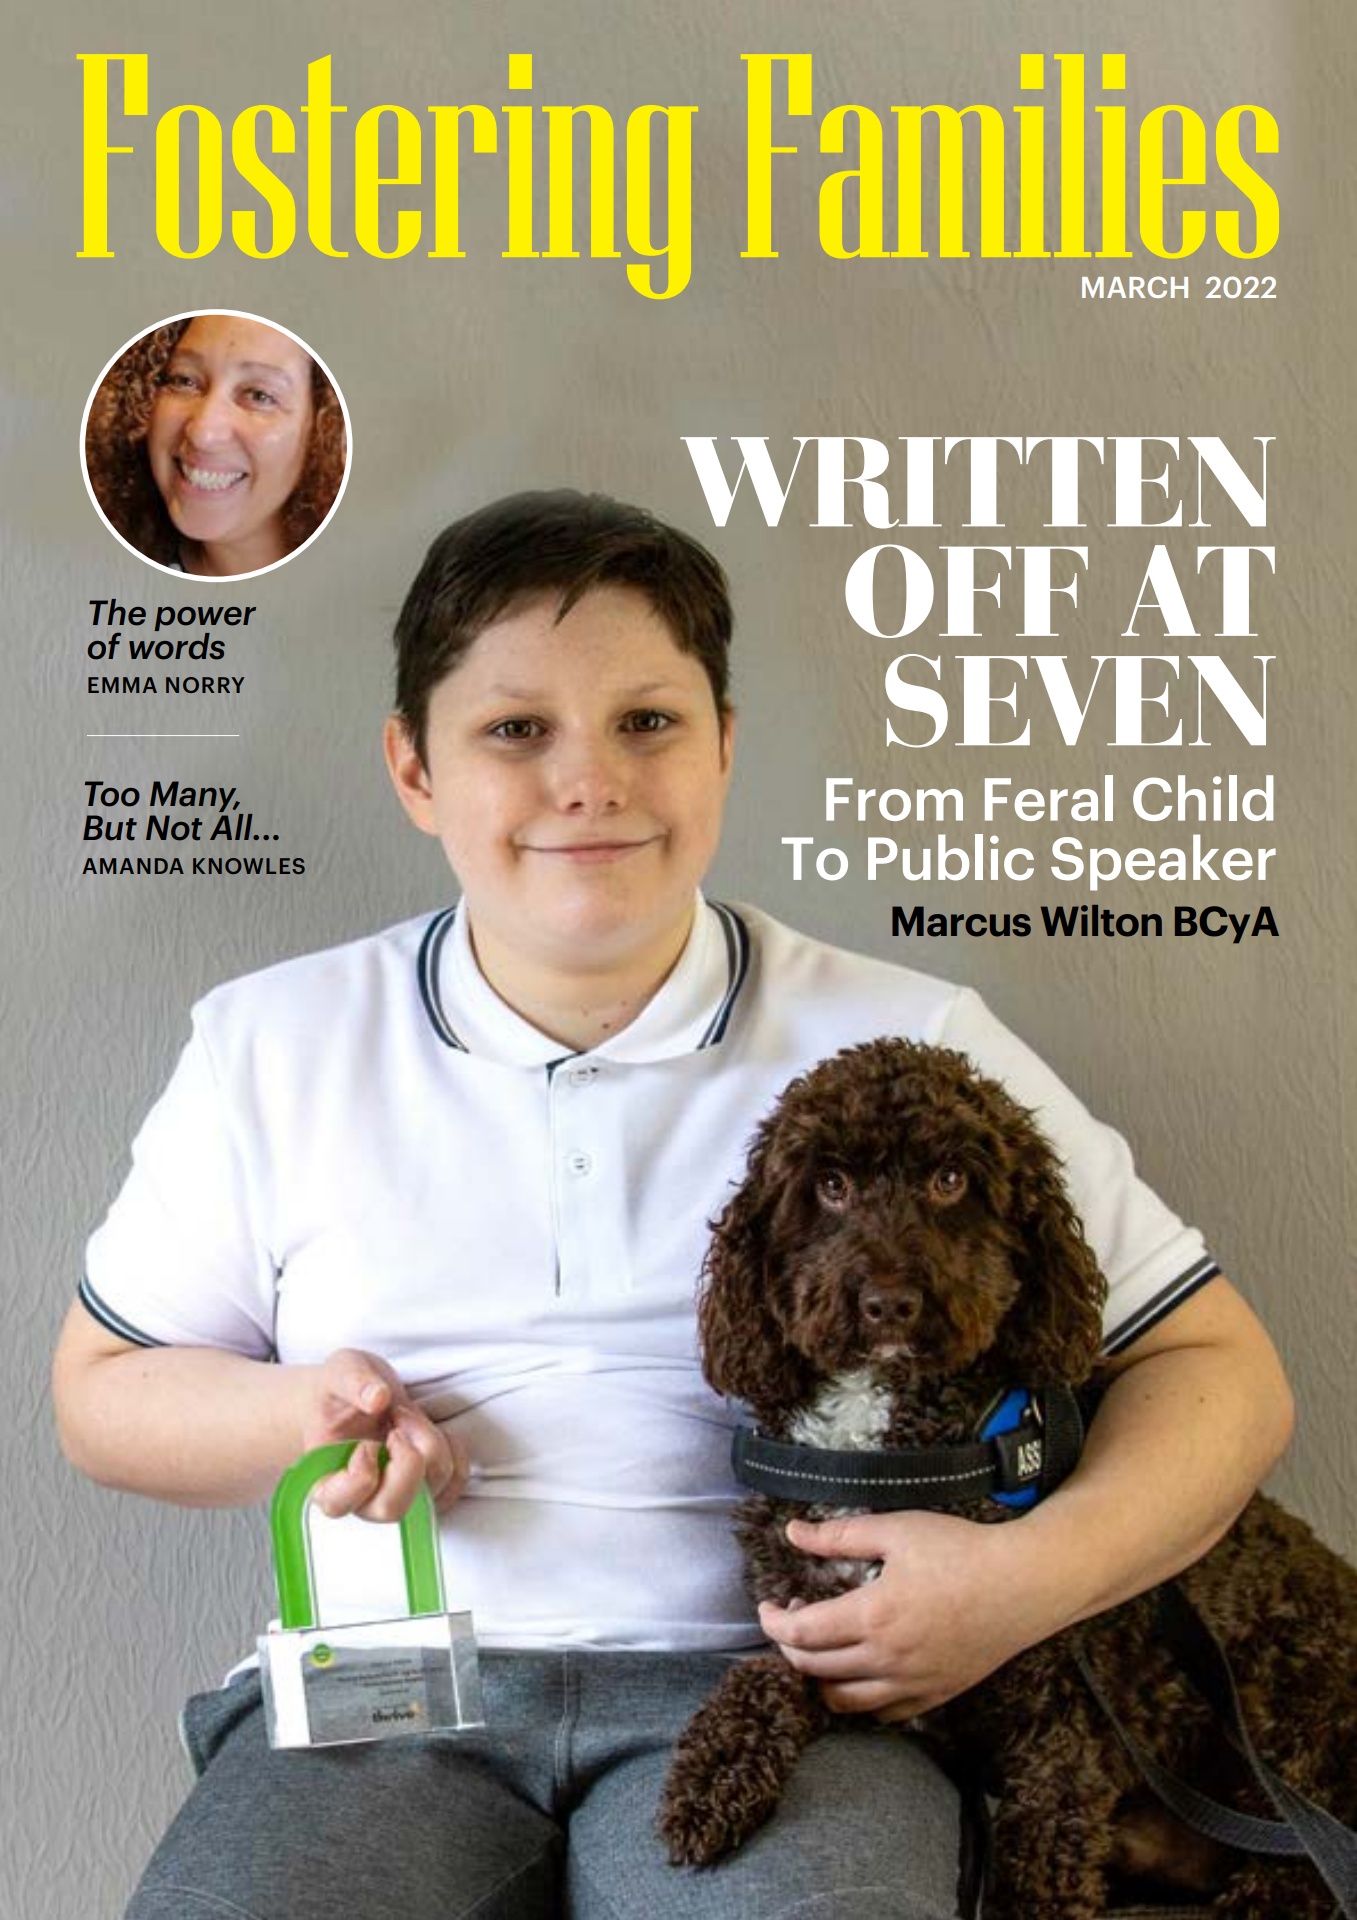 Fostering Families Magazine March 2022